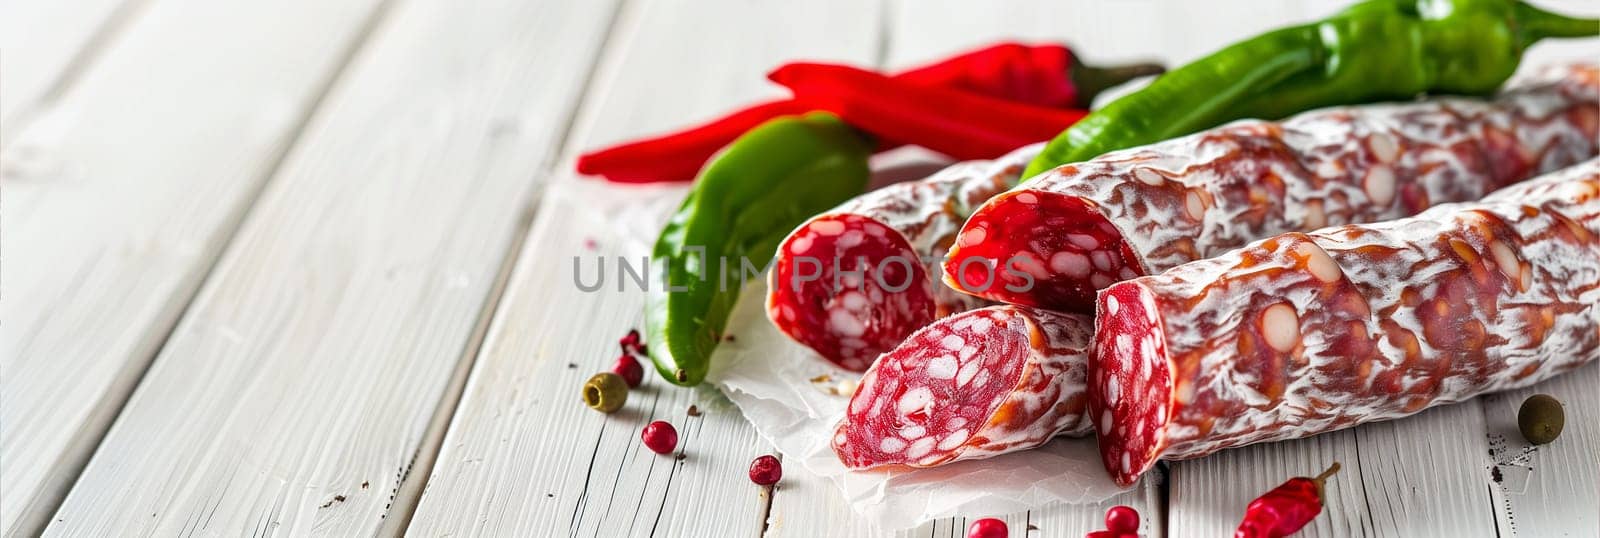 Sliced cured salami next to vibrant red chili peppers, fresh basil leaves, and scattered peppercorns on a textured wooden surface.